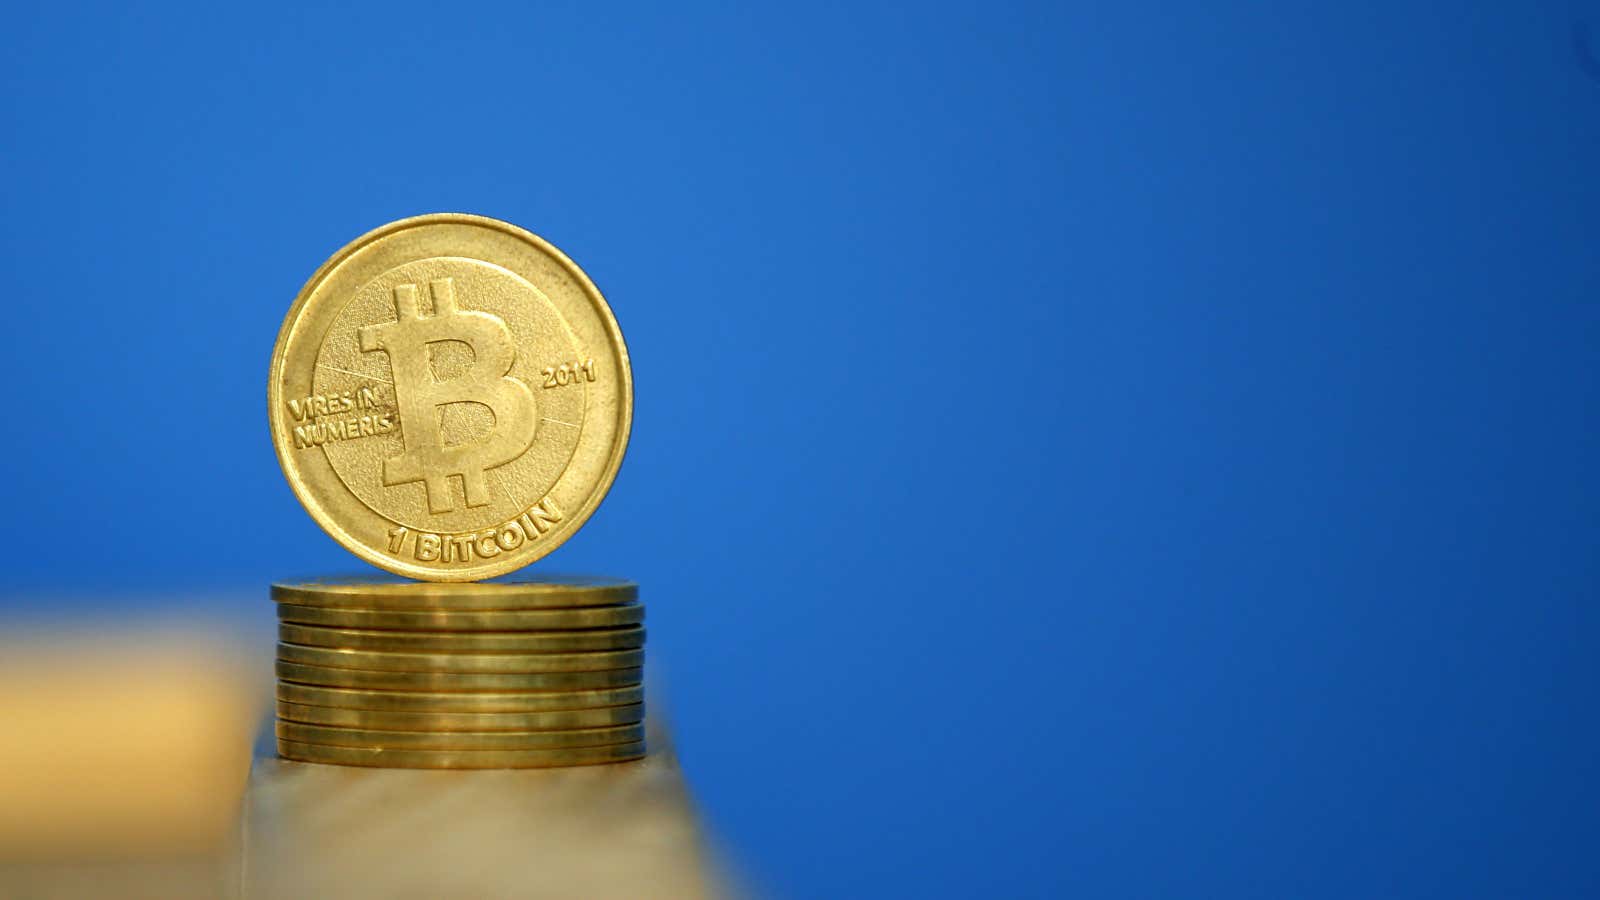 Bitcoin is the worst investment of 2014